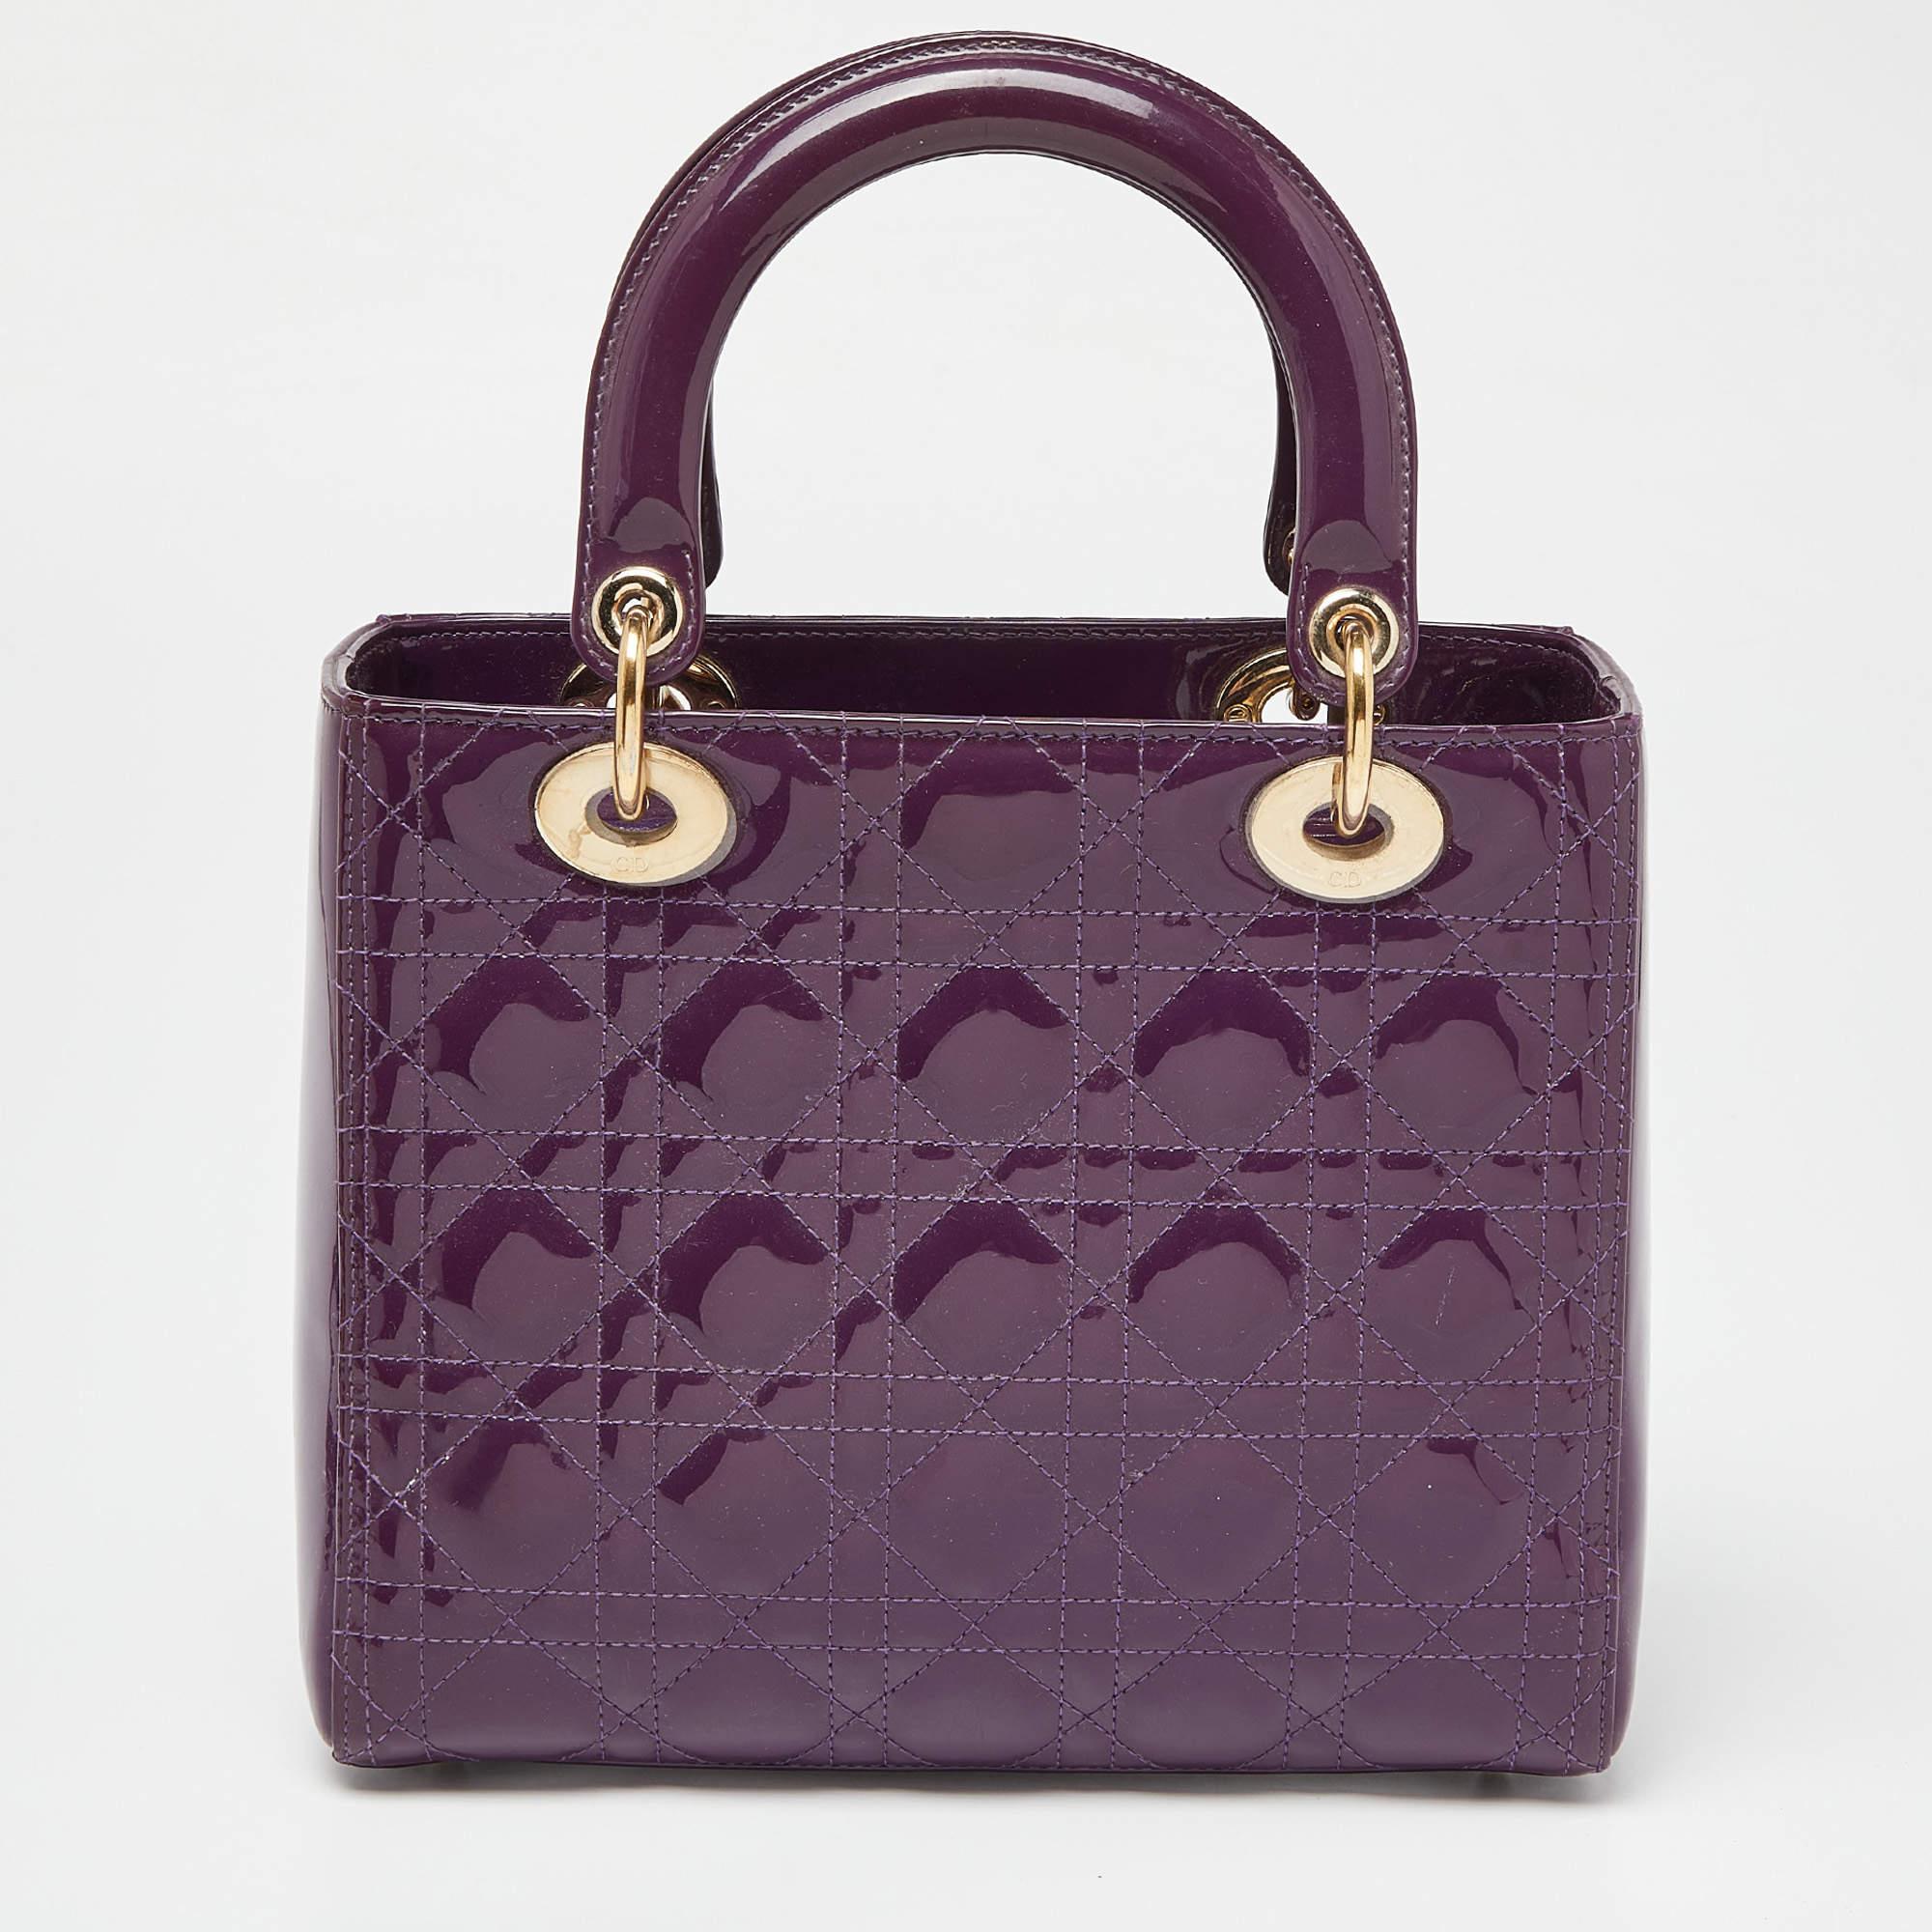 The Lady Dior tote is a Dior creation that has gained wide recognition and is a coveted bag that every fashionista craves to possess. The purple tote has been crafted from patent leather and carries the signature Cannage quilt. It is equipped with a